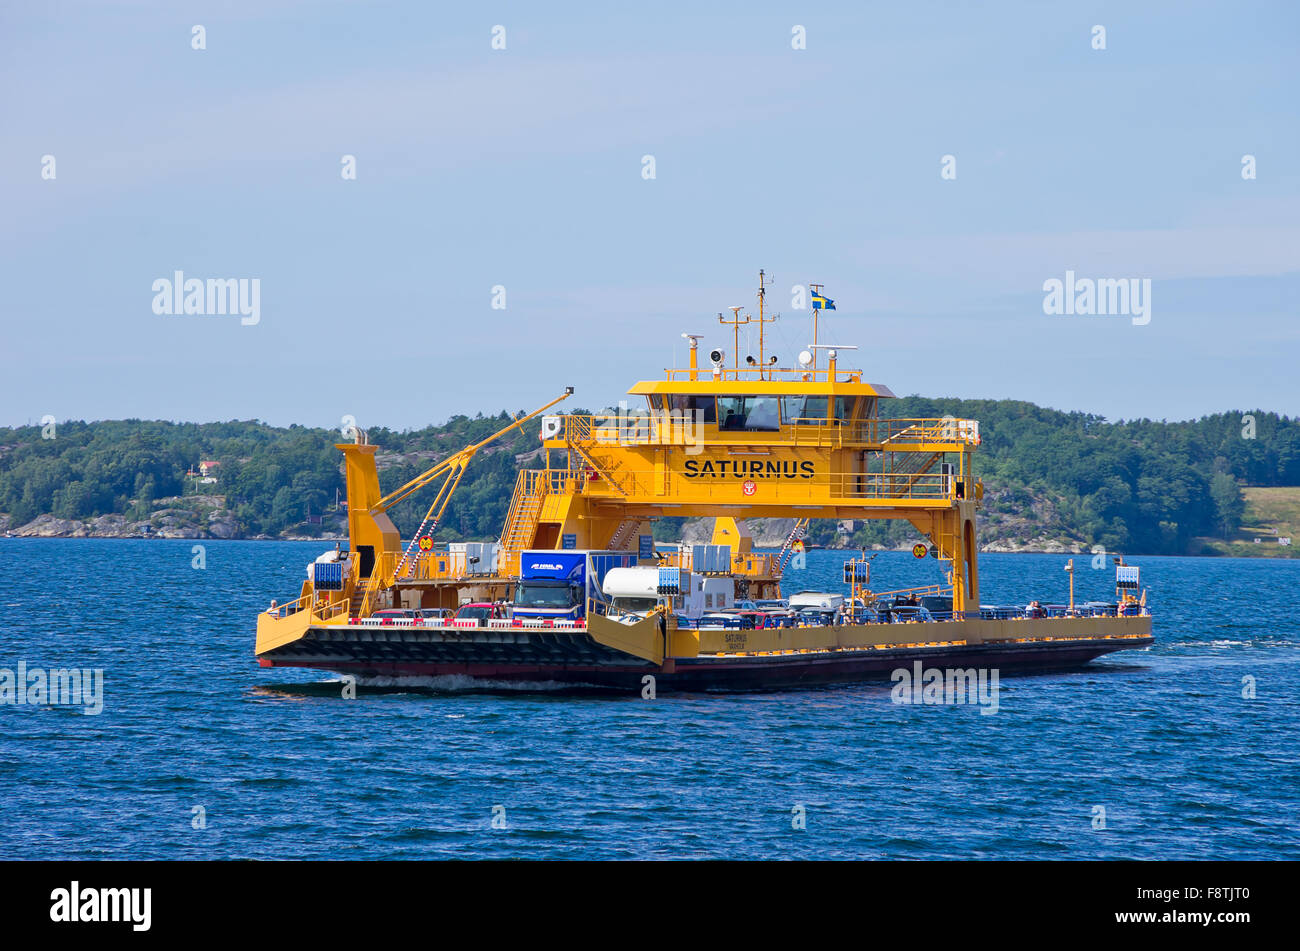 ROAD FERRYBOAT DRIVES PAST Stock Photo